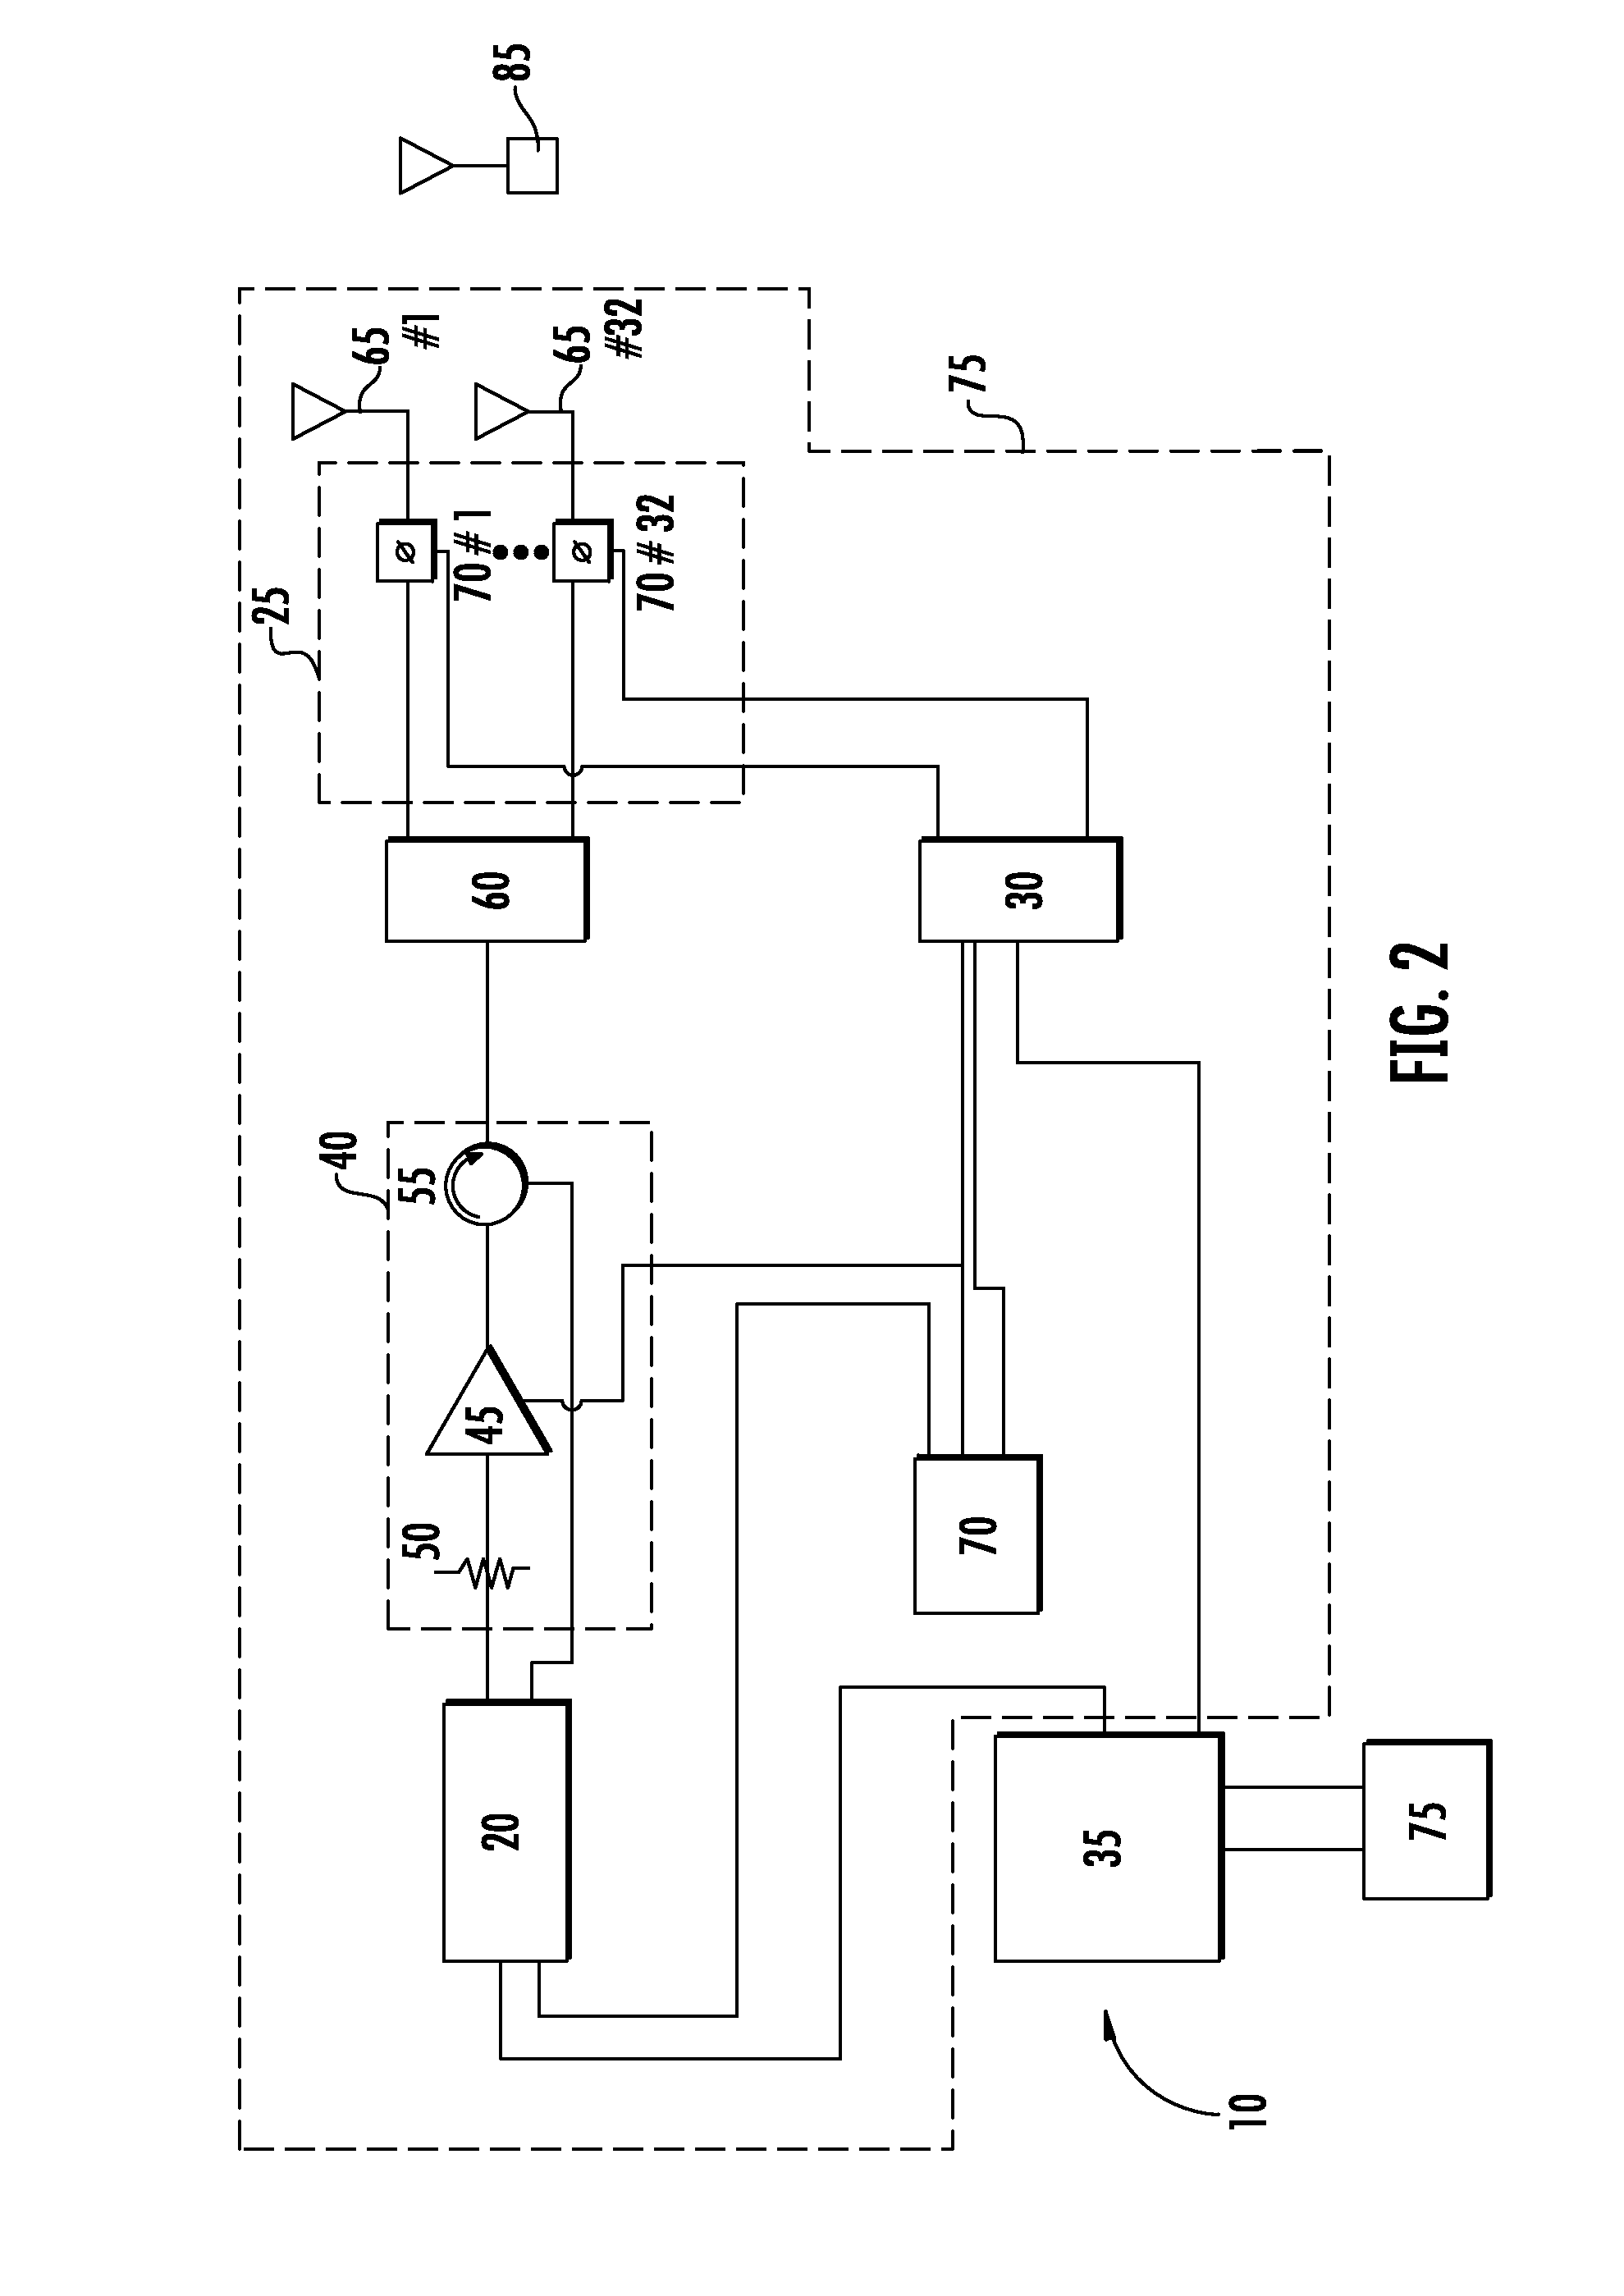 Steerable phase array antenna RFID tag locater and tracking system and methods